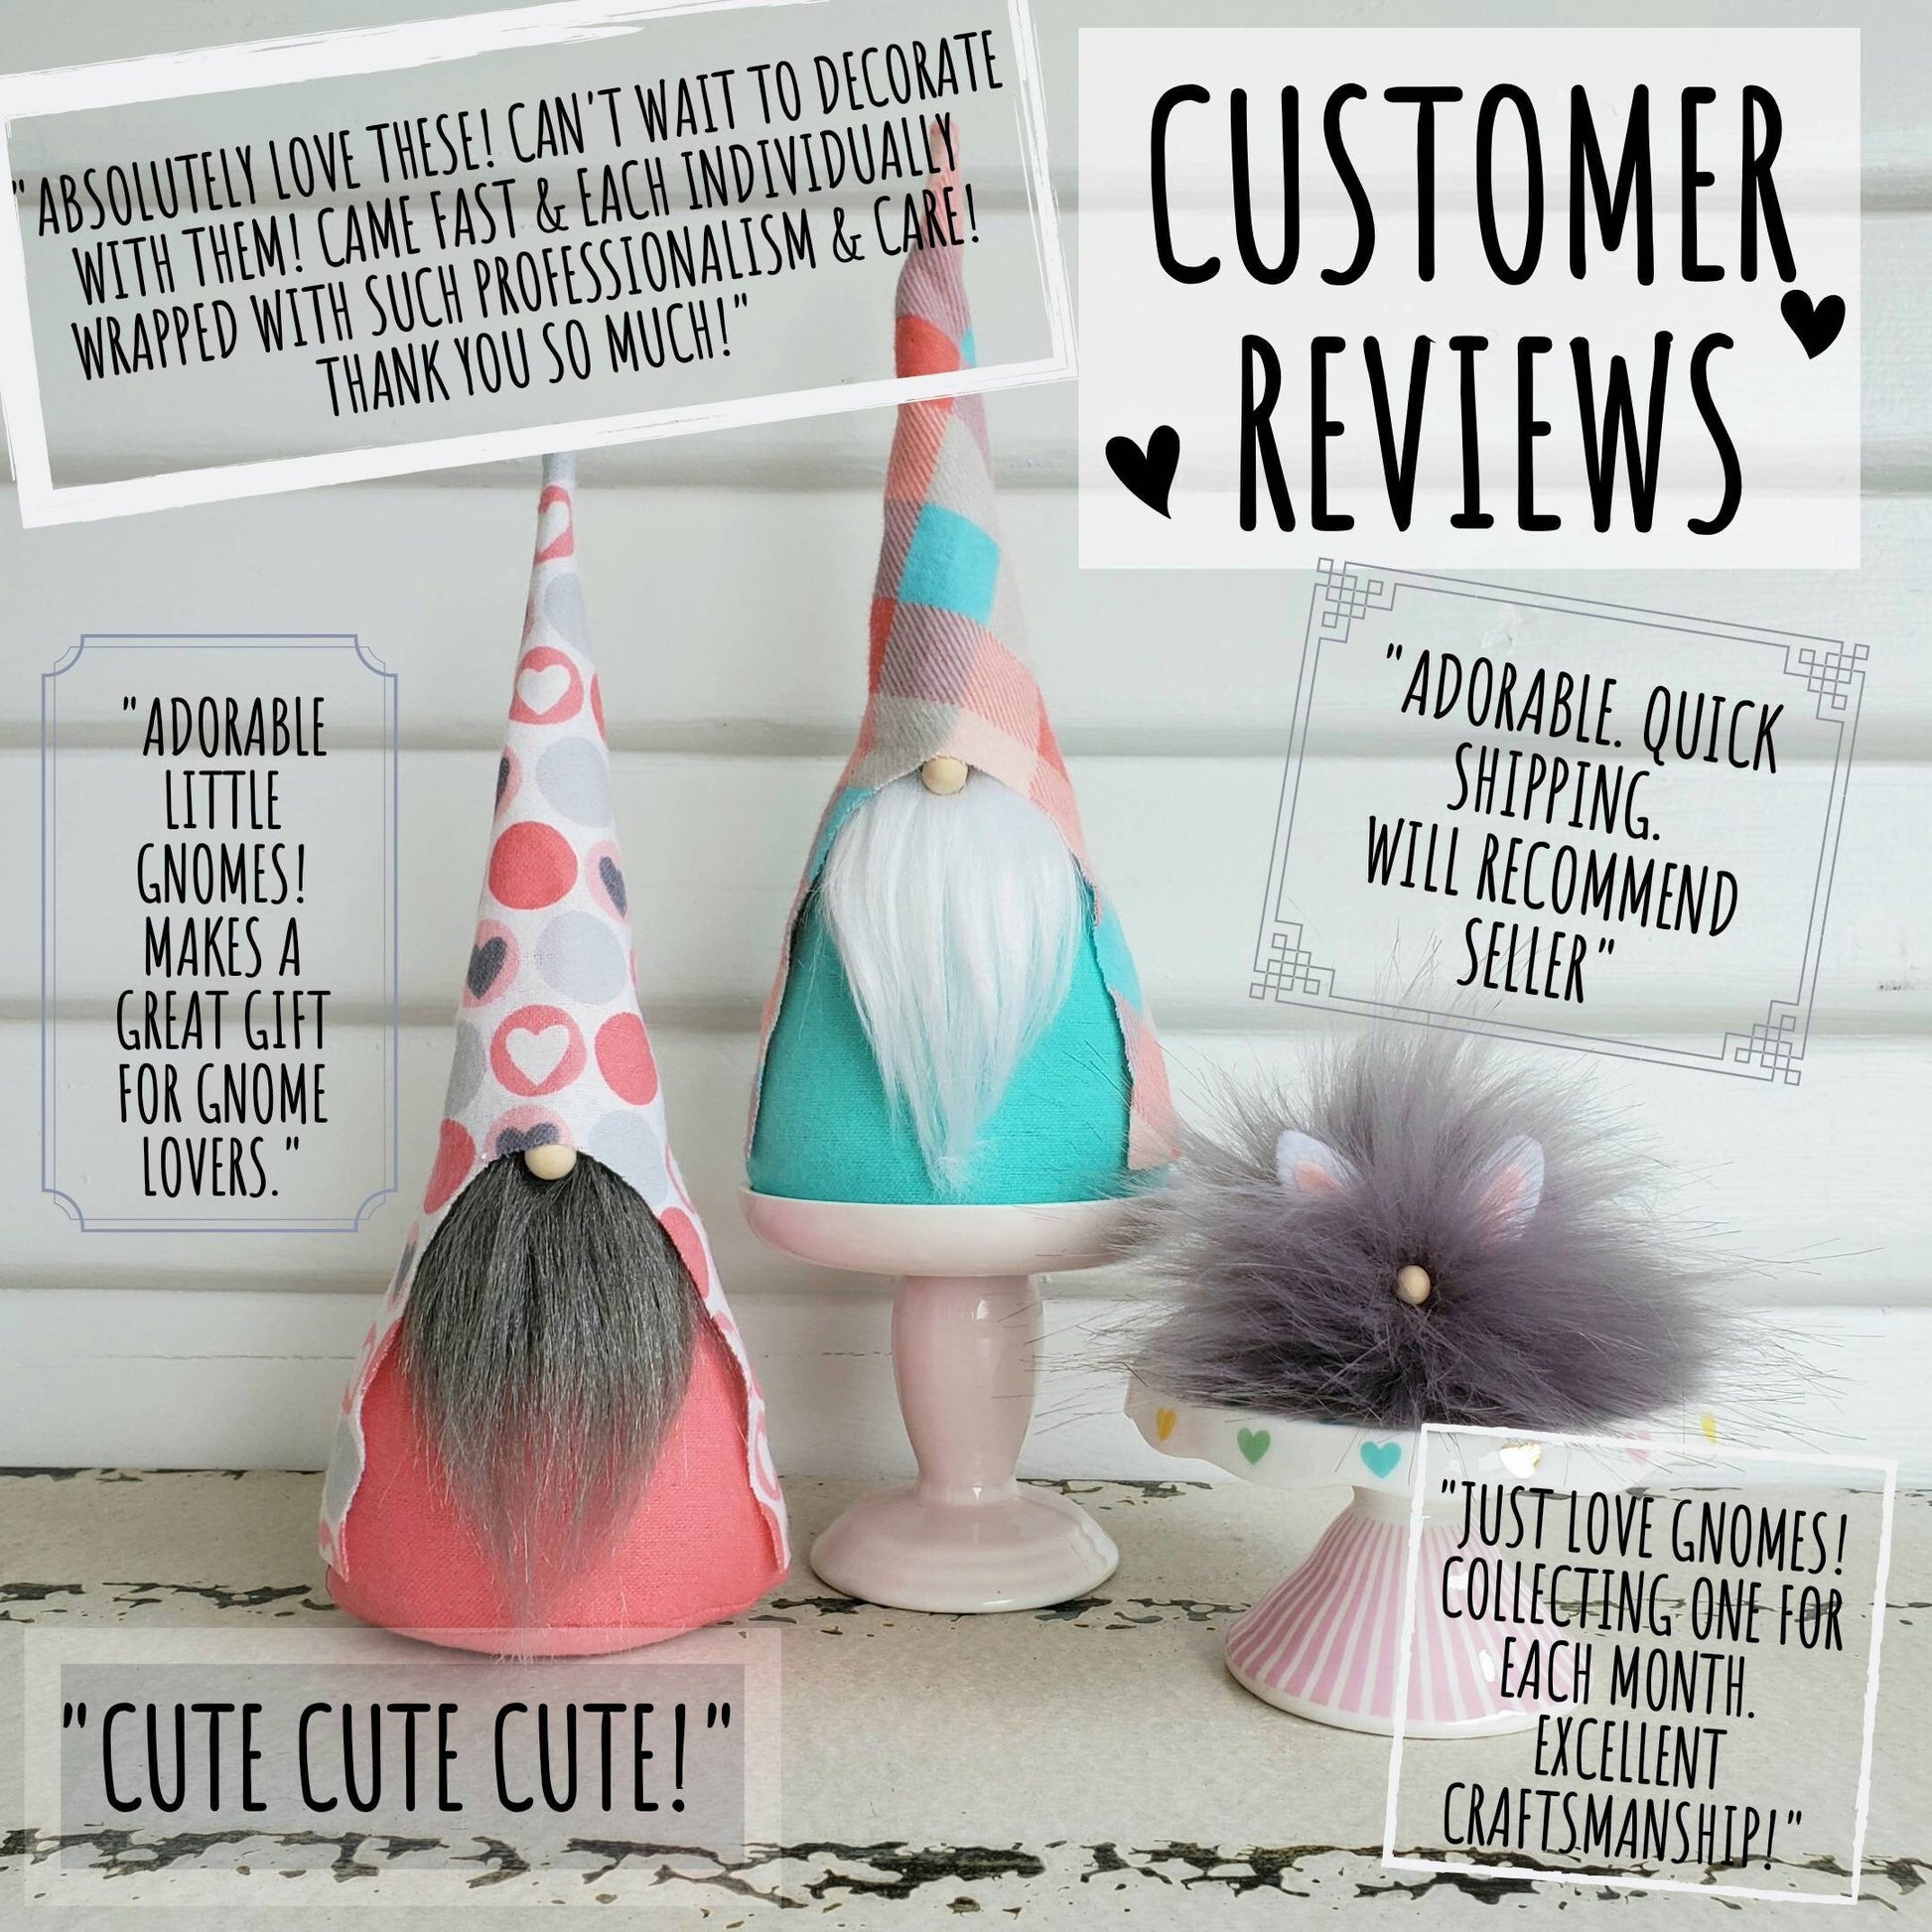 Customer reviews for handmade Gnomes, displayed around 2 Spring Gnomes in Aqua and Coral colors, as well as a gray Gnome pet. 